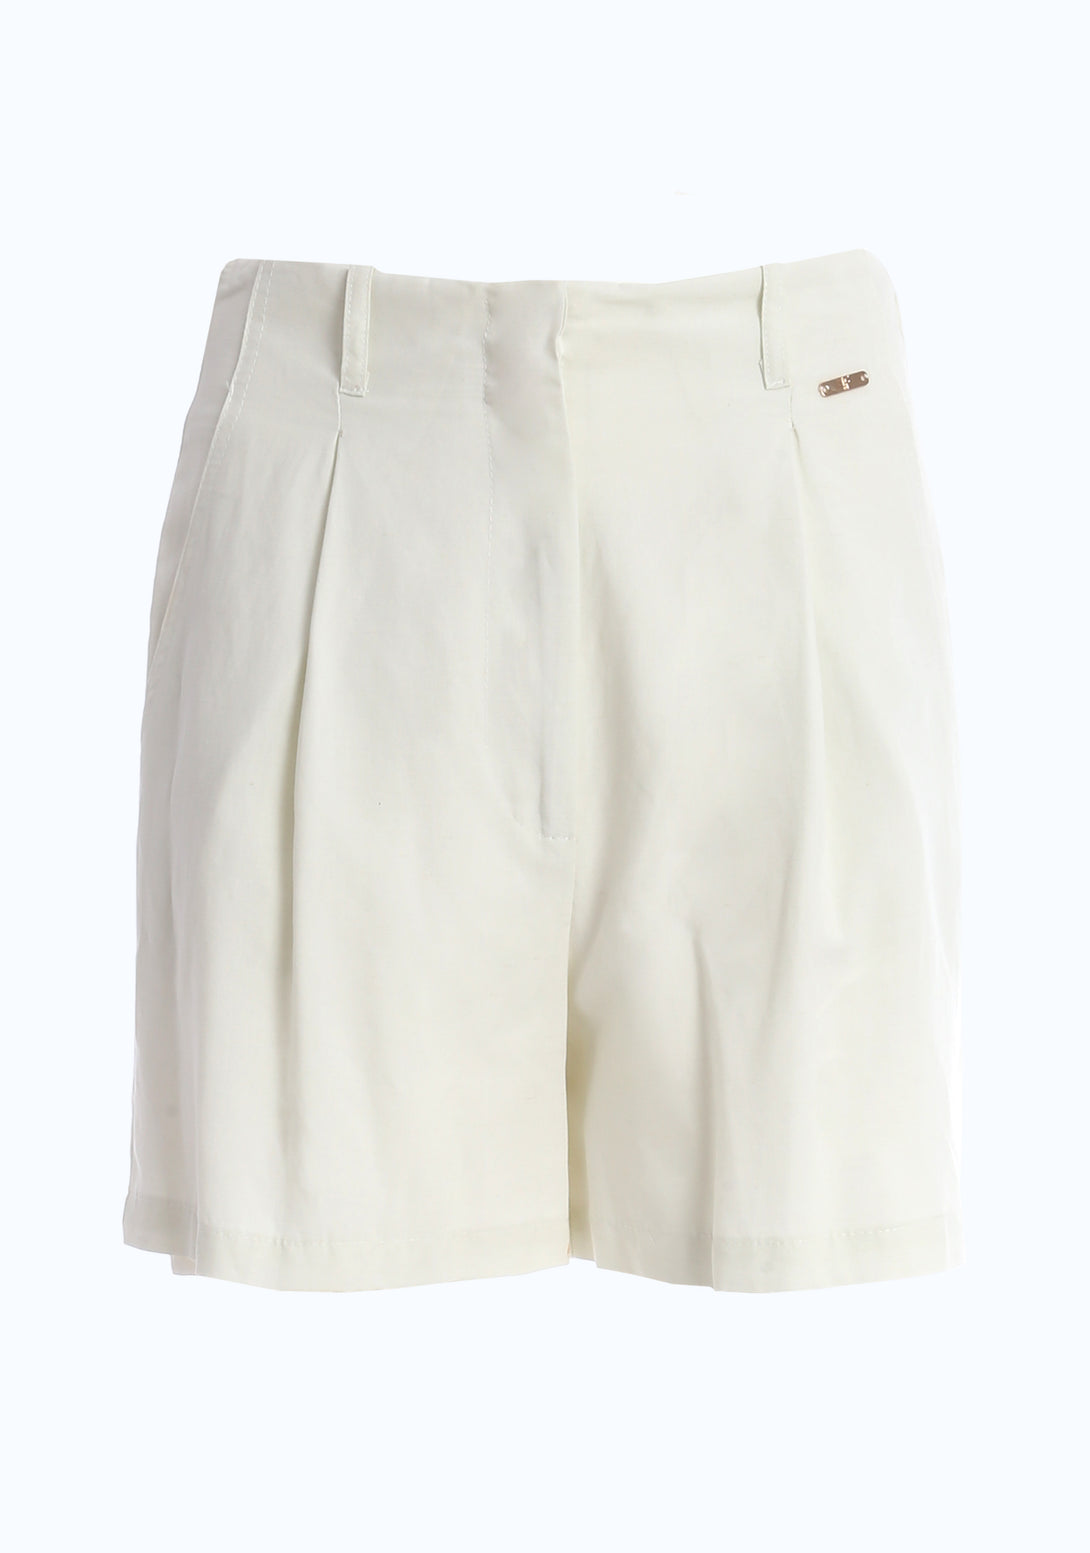 Short pant regular fit made in viscose and linen